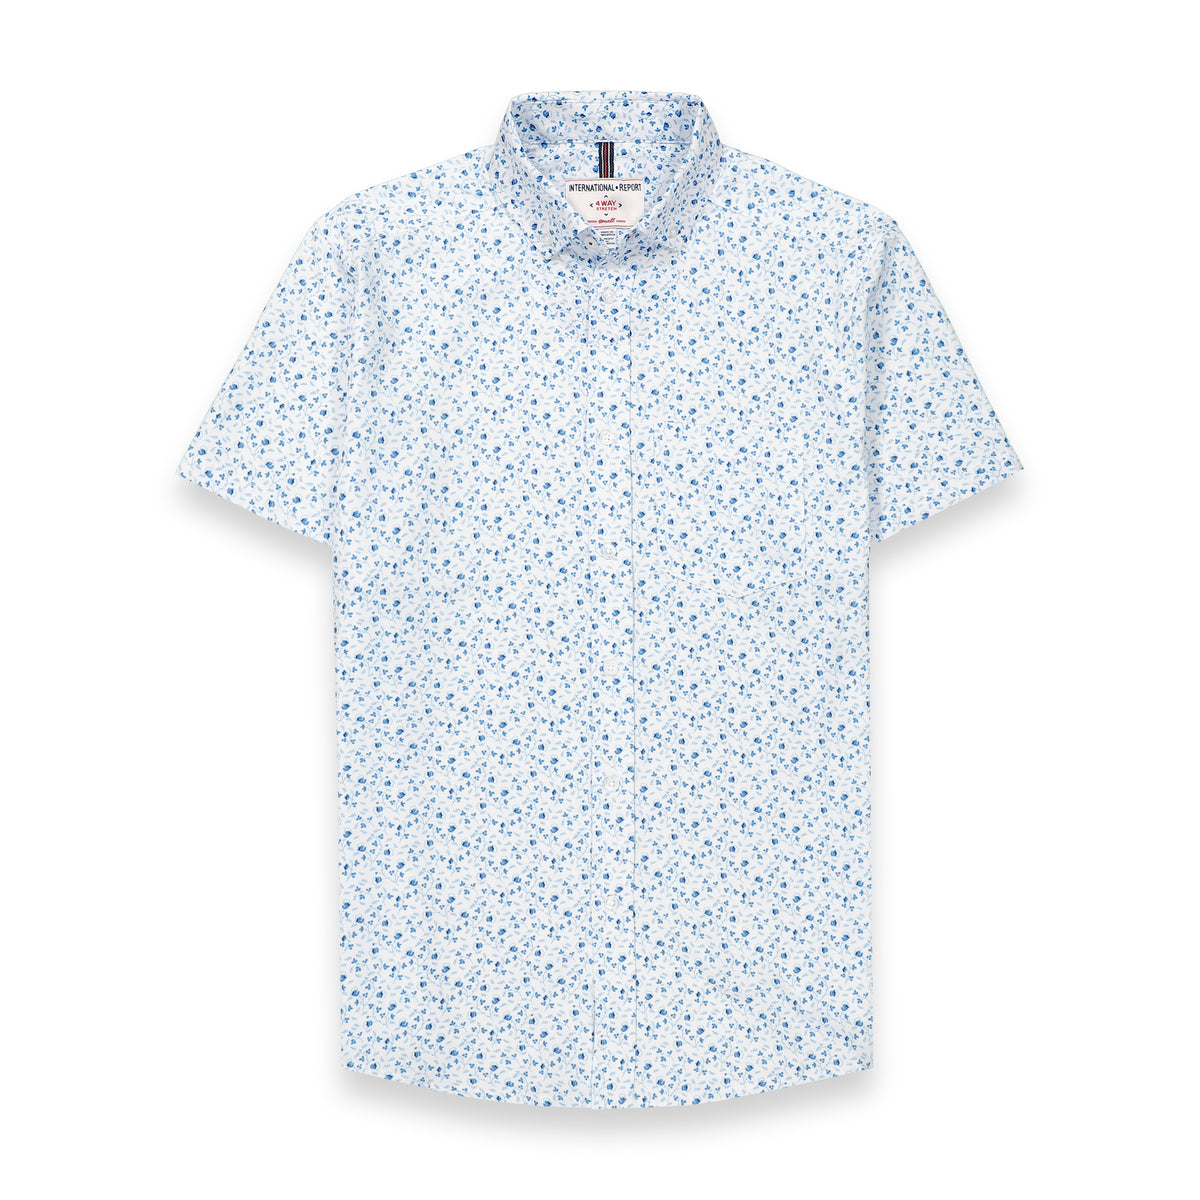 Front View of Short Sleeve 4-Way Stretch Shirt with Floral Print in Blue